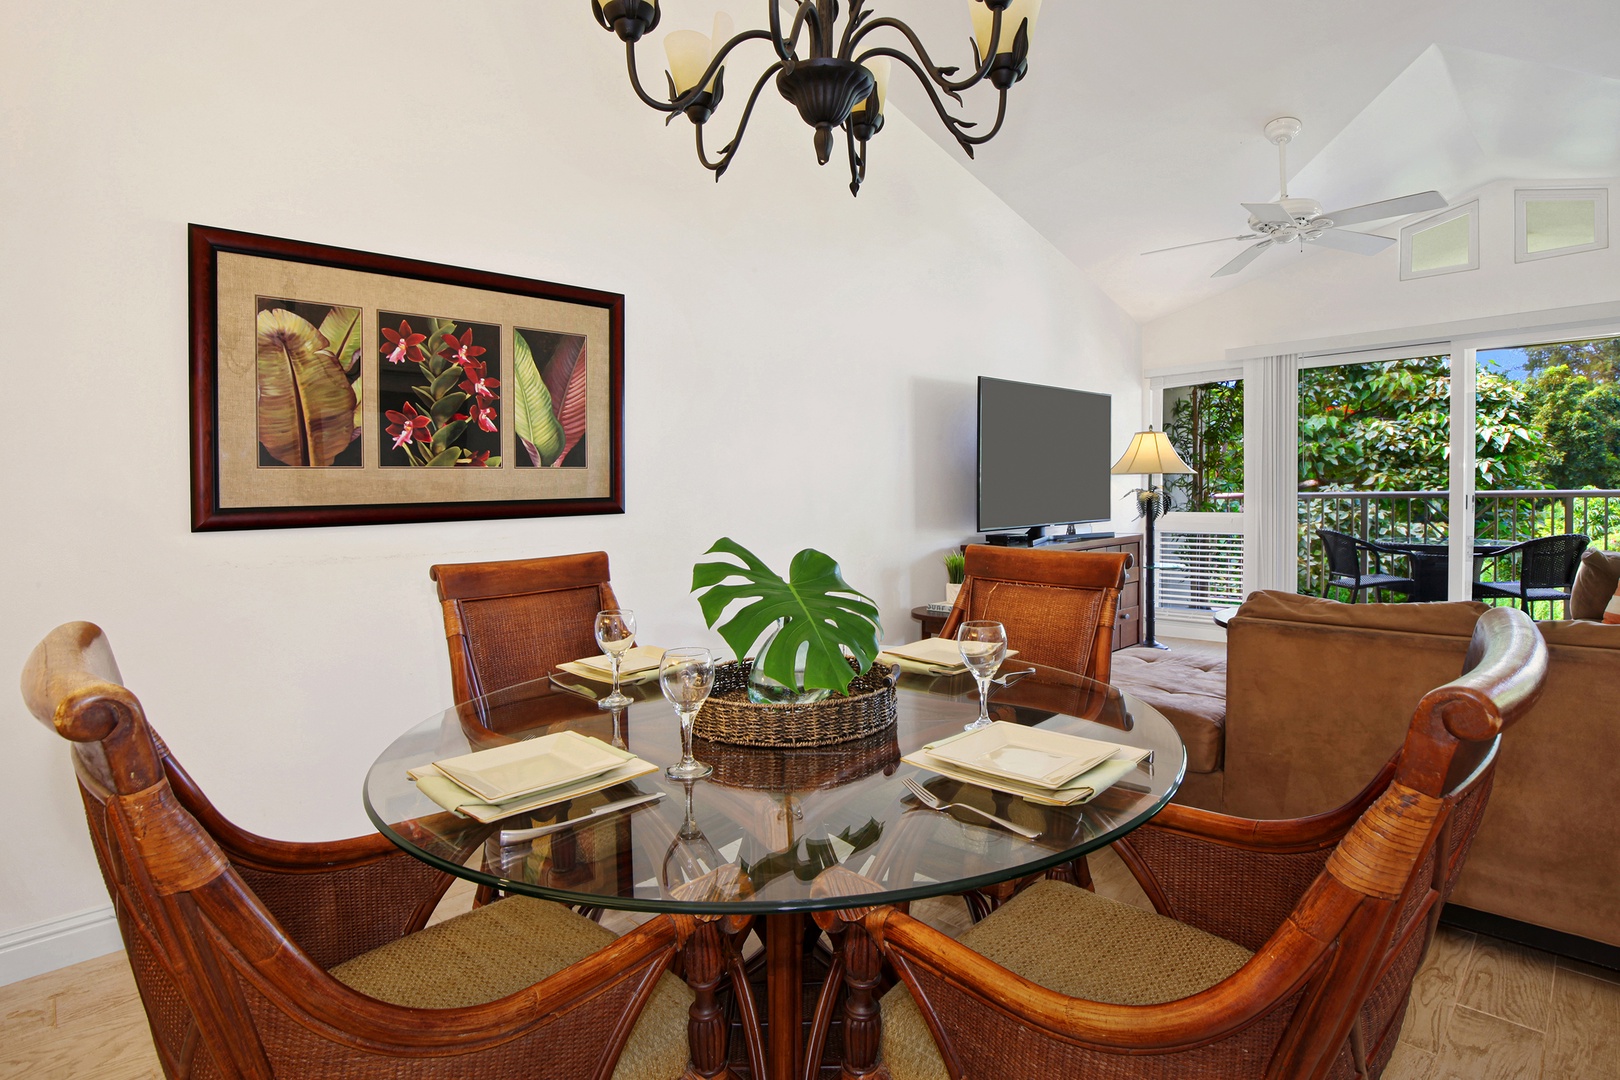 Princeville Vacation Rentals, Villas of Kamalii #35 - Dining area with seating for 4 and views